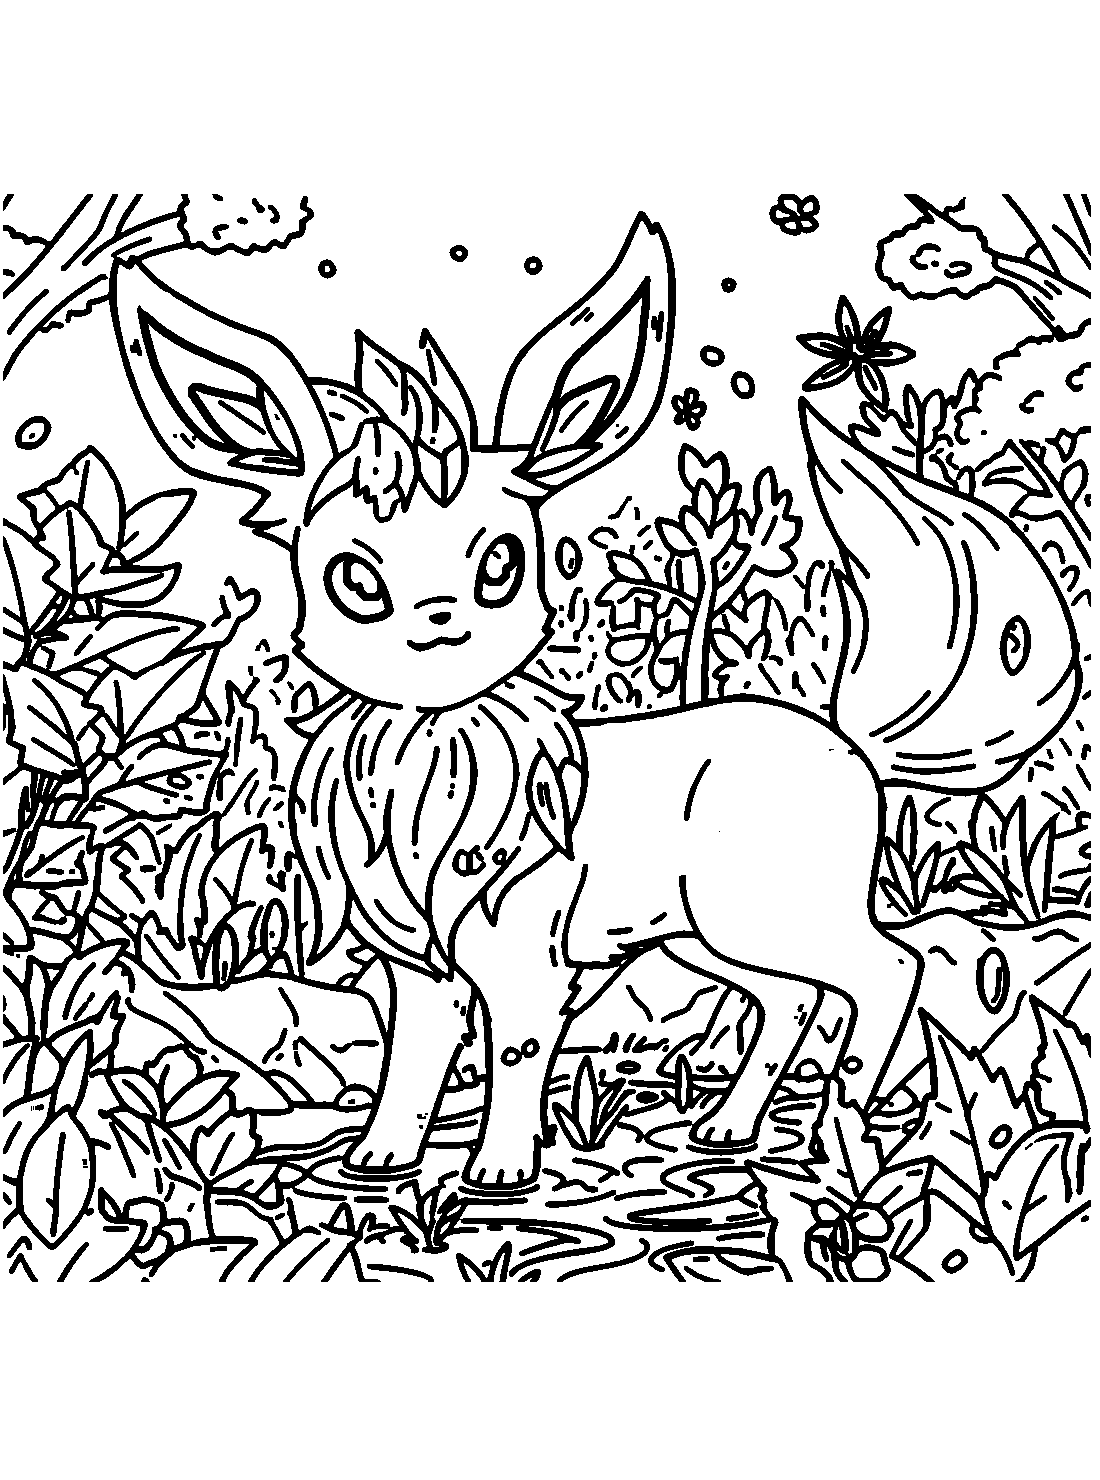 Chibi Leafeon Coloring Page